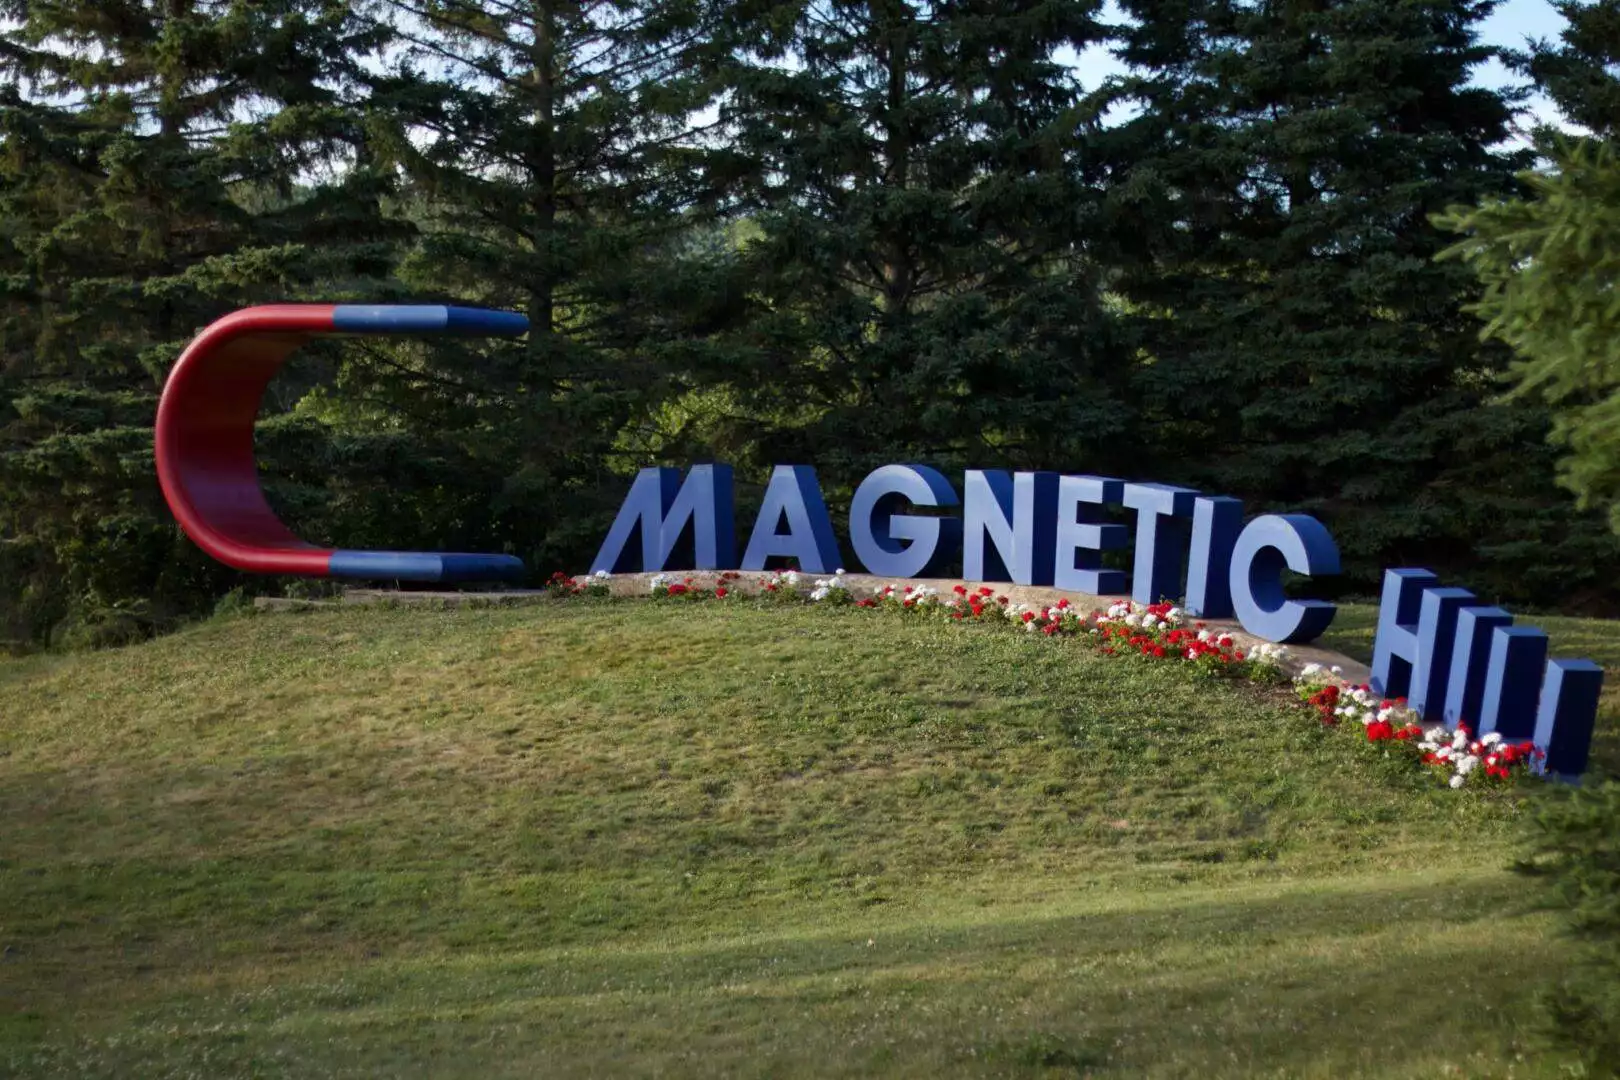 magnetic hill